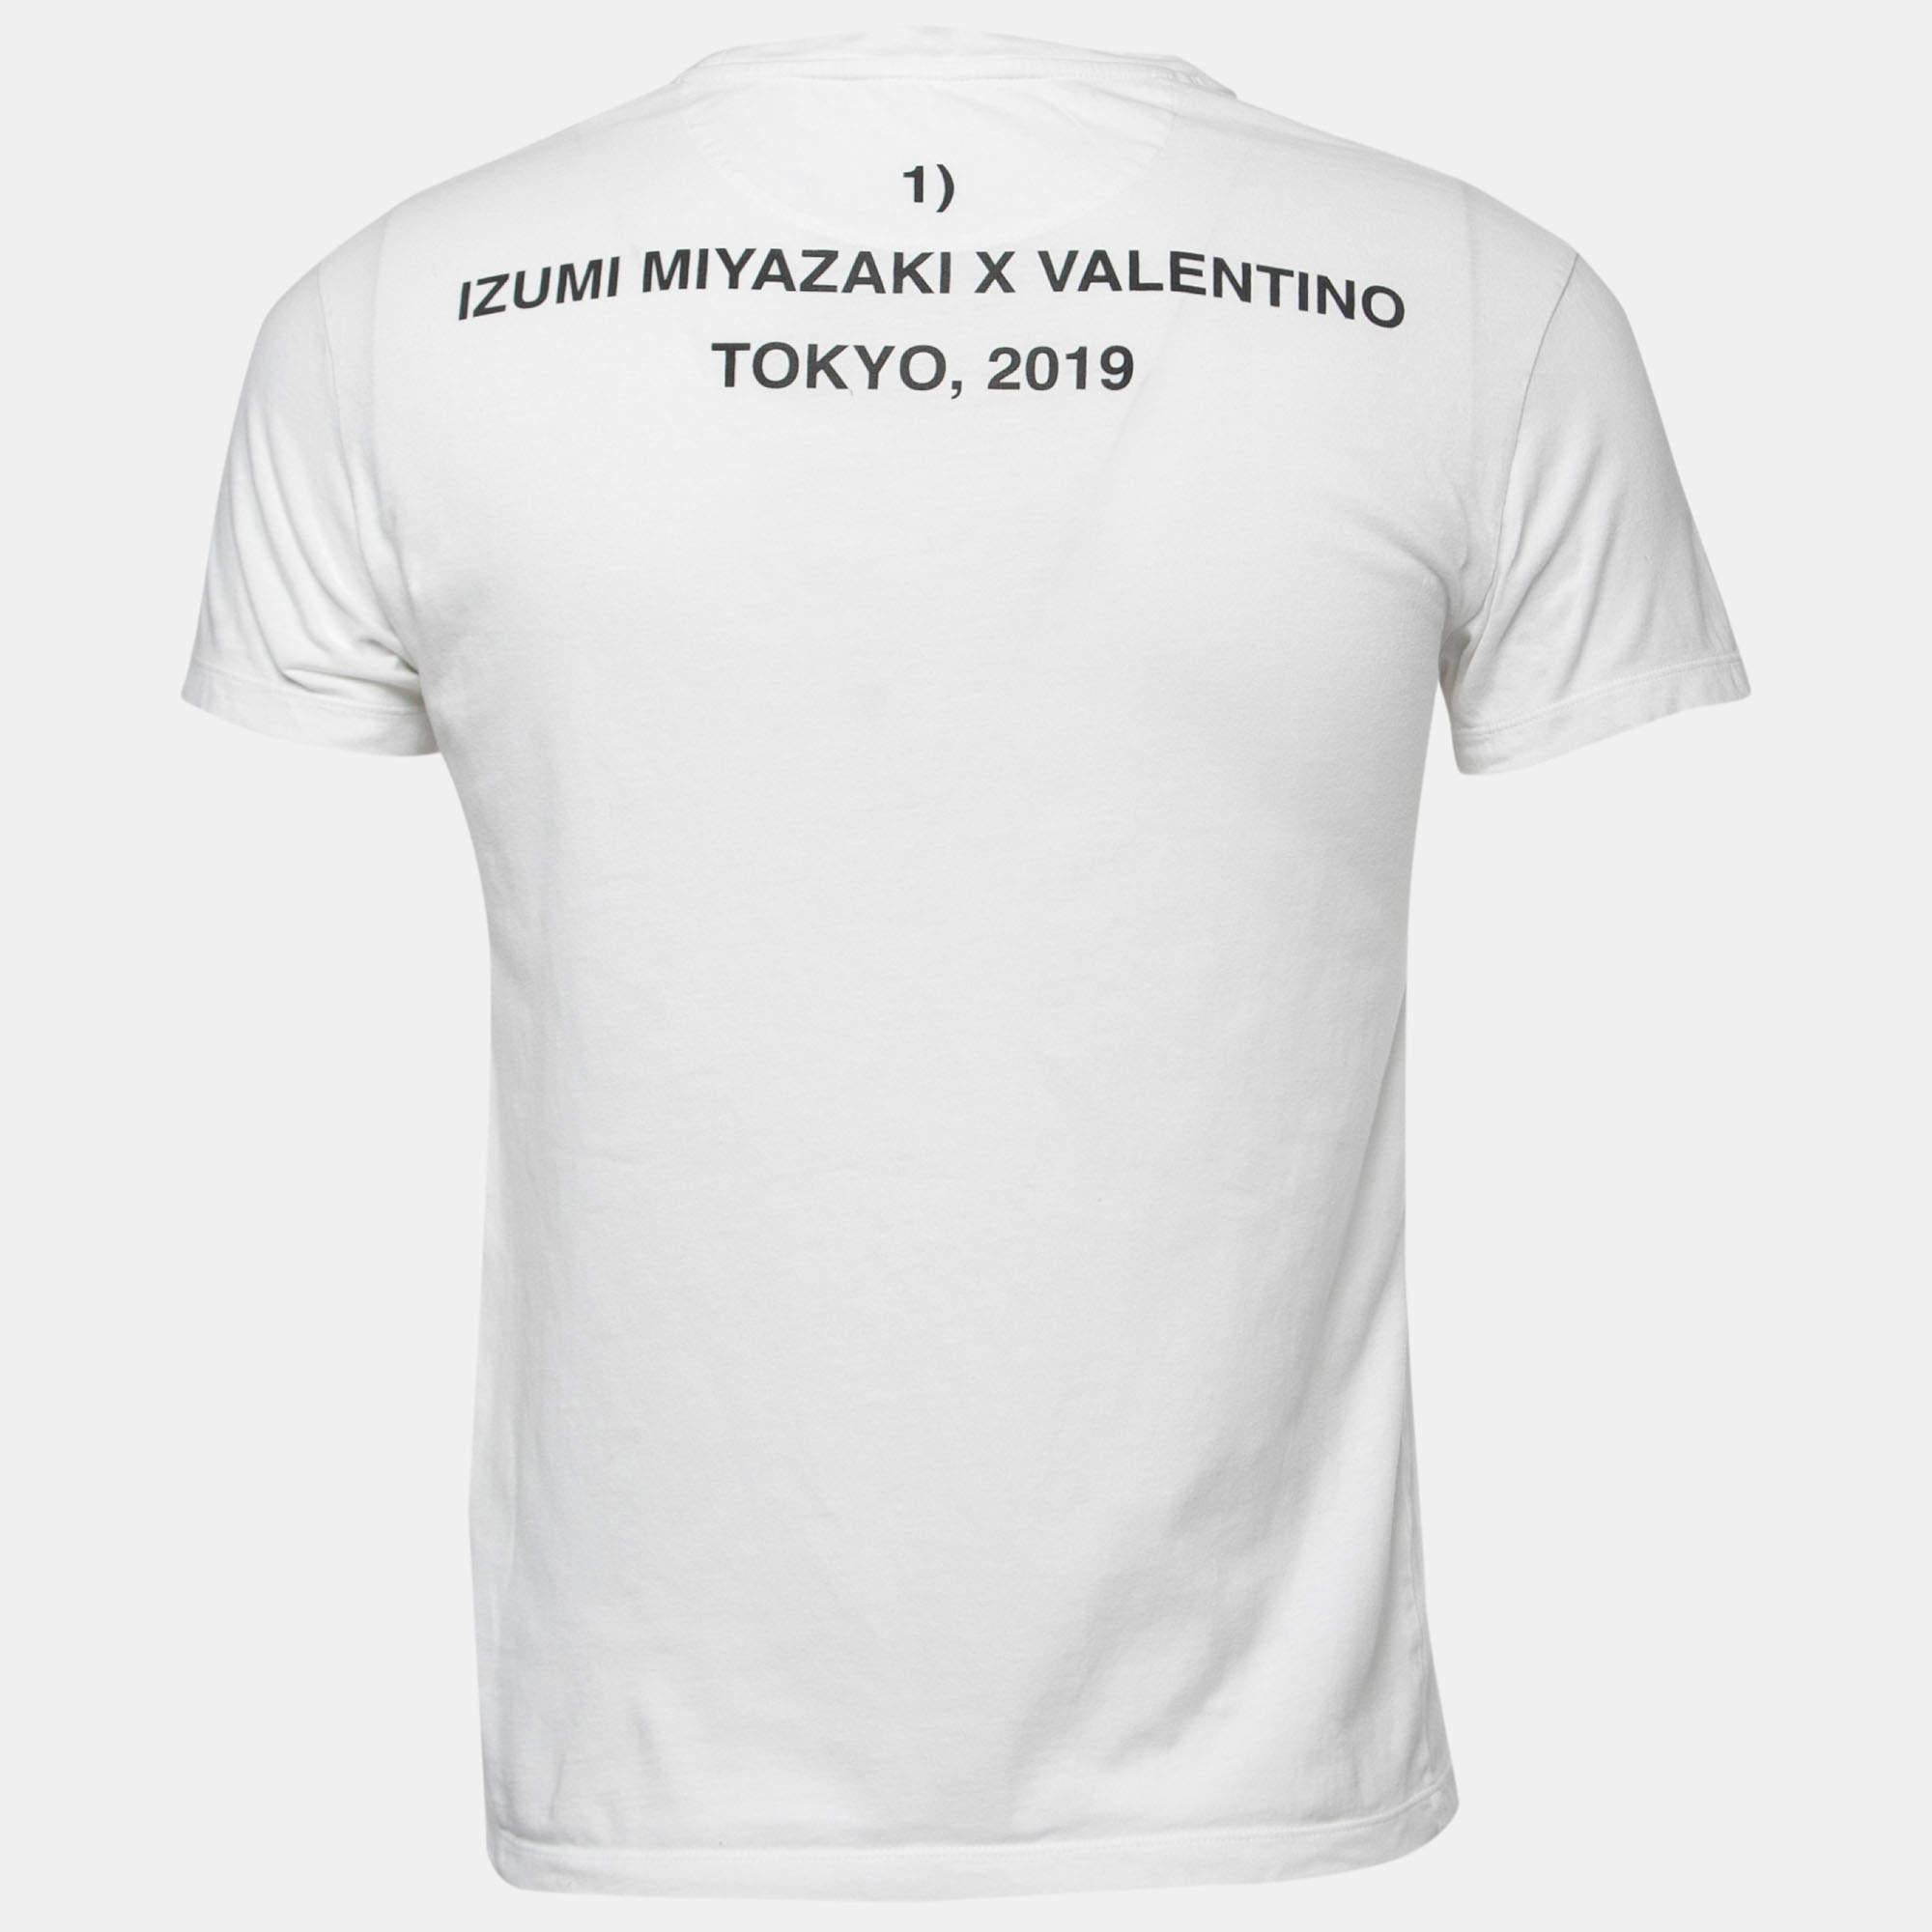 Choose all-day comfort with this Valentino X Izumi Miyazaki T-shirt. Beautifully sewn, the white T-shirt, featuring a round neckline, eye-catching print, and short sleeves, guarantees quality and simple style.

